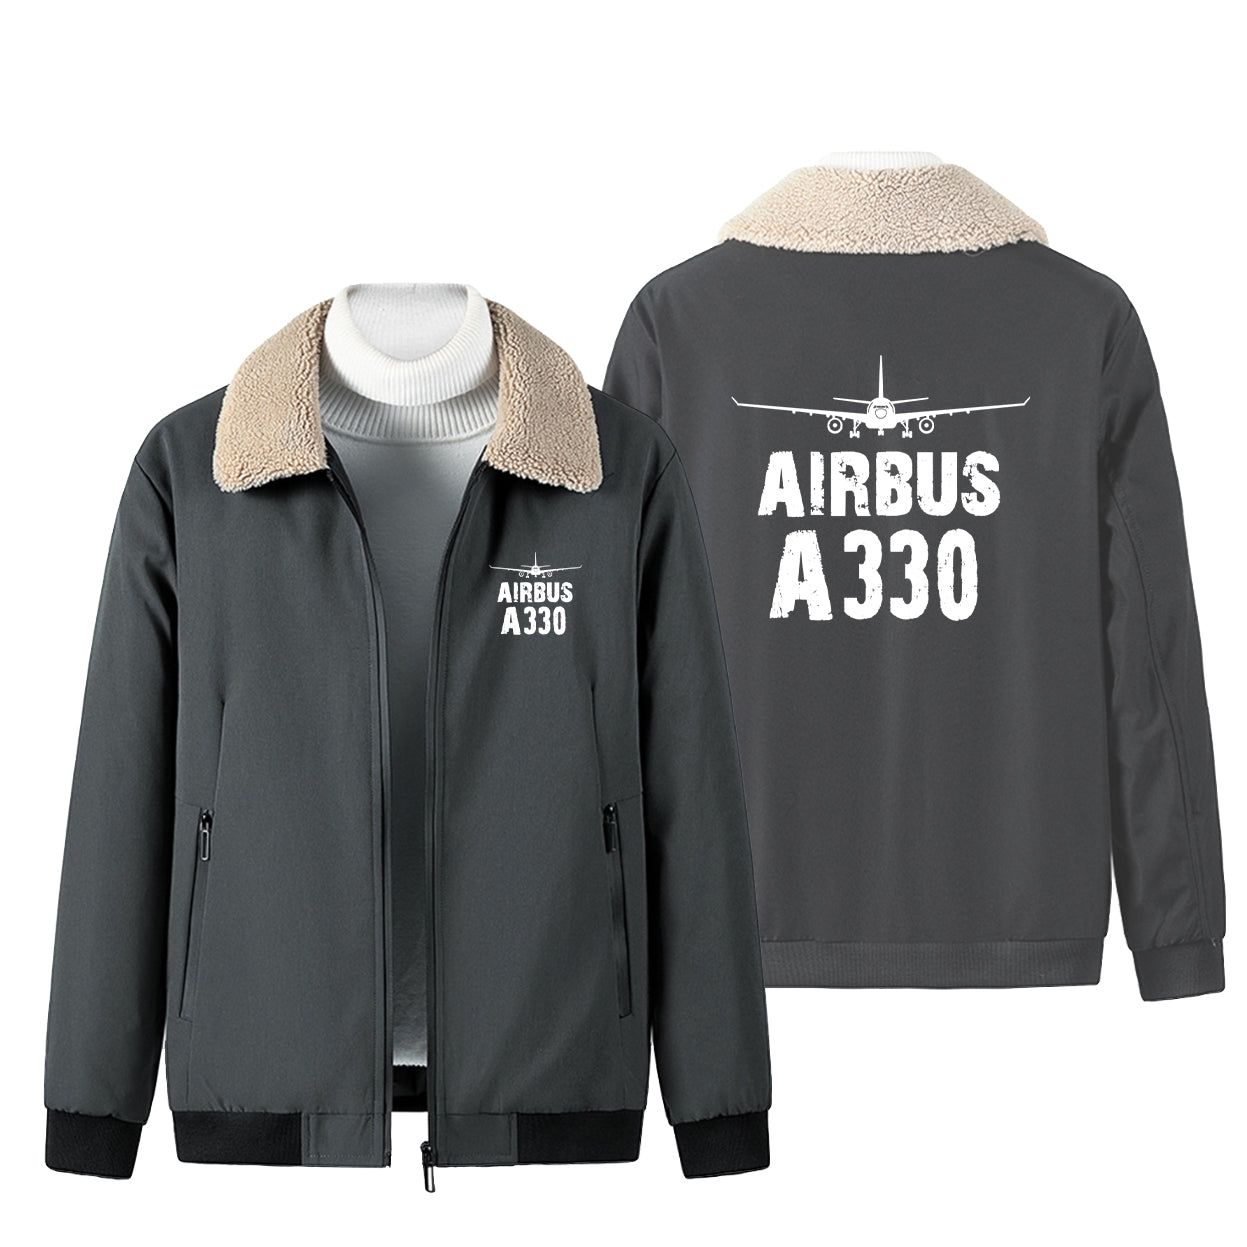 Airbus A330 & Plane Designed Winter Bomber Jackets